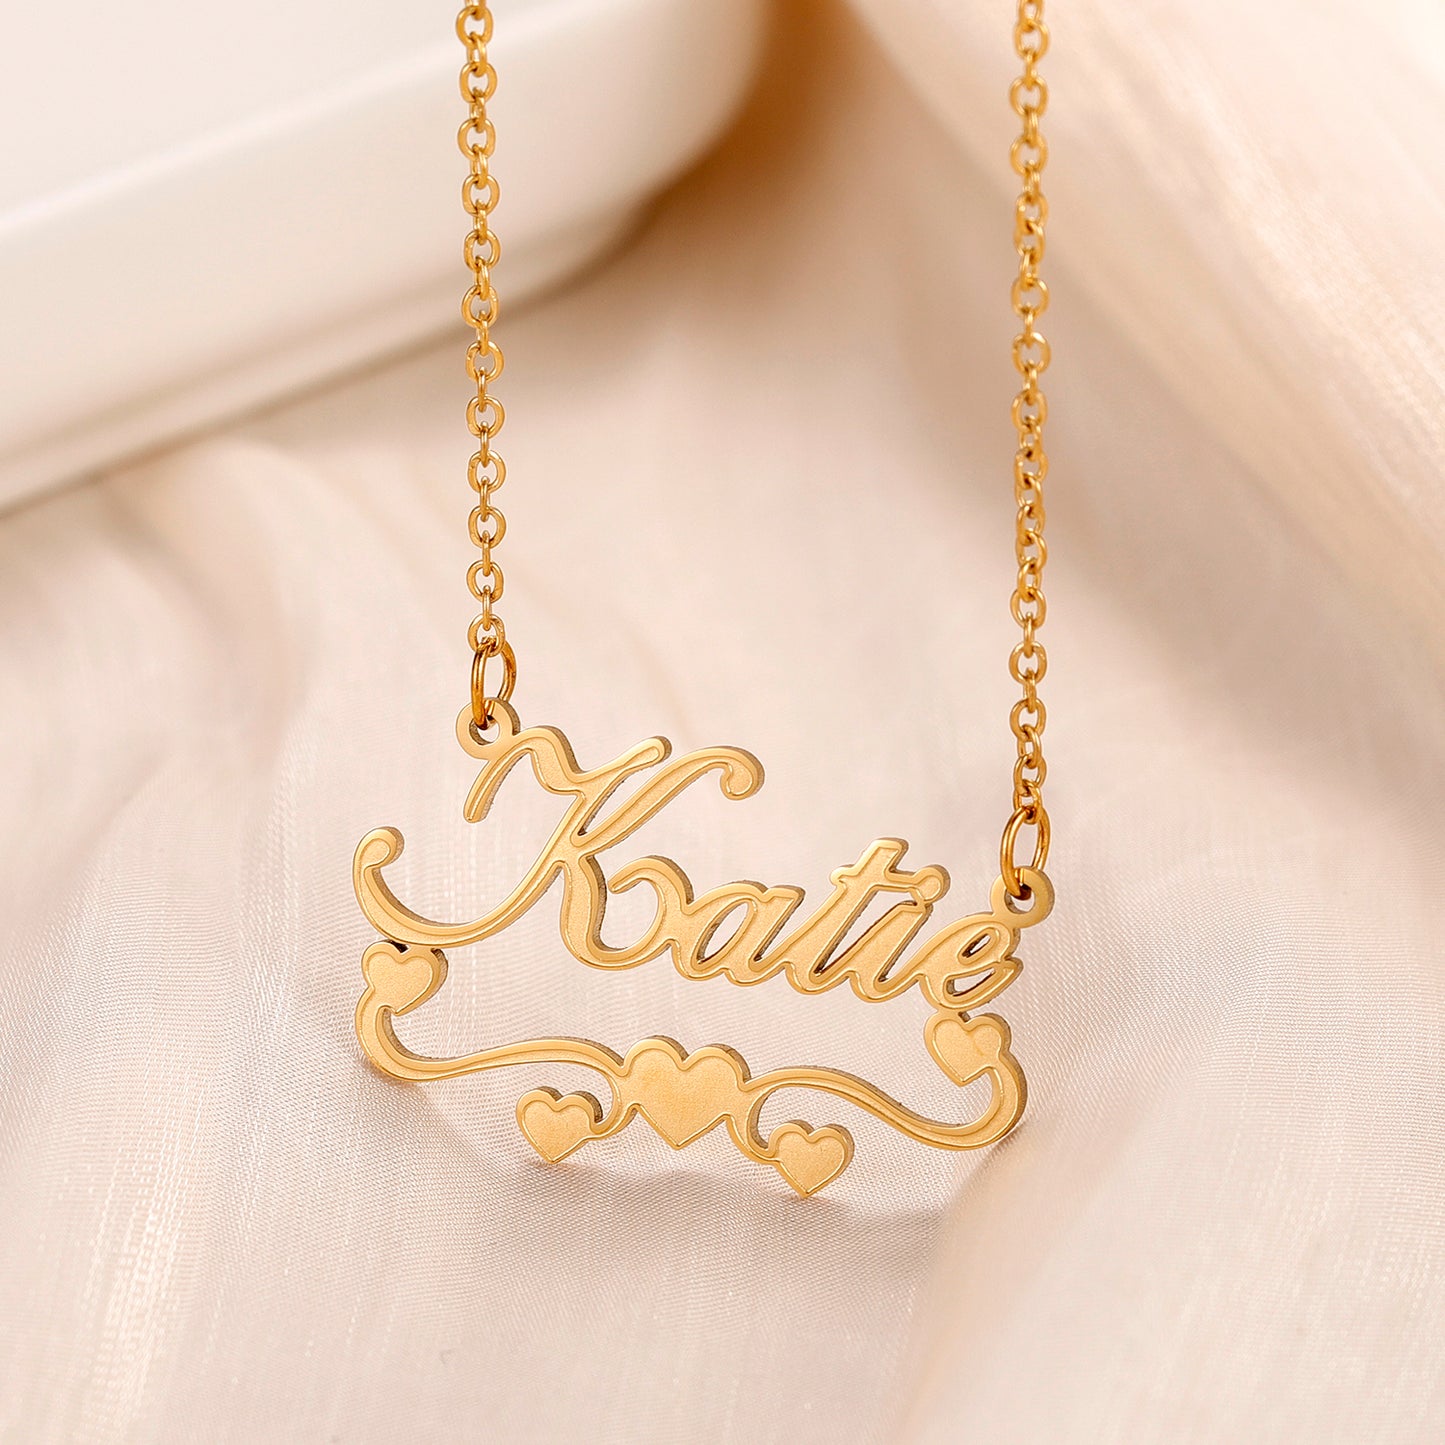 Personalised Single Name Necklace - Ribbon & Hearts Custom Cute Unique Jewellery Gift in Arabic or English -  EZME